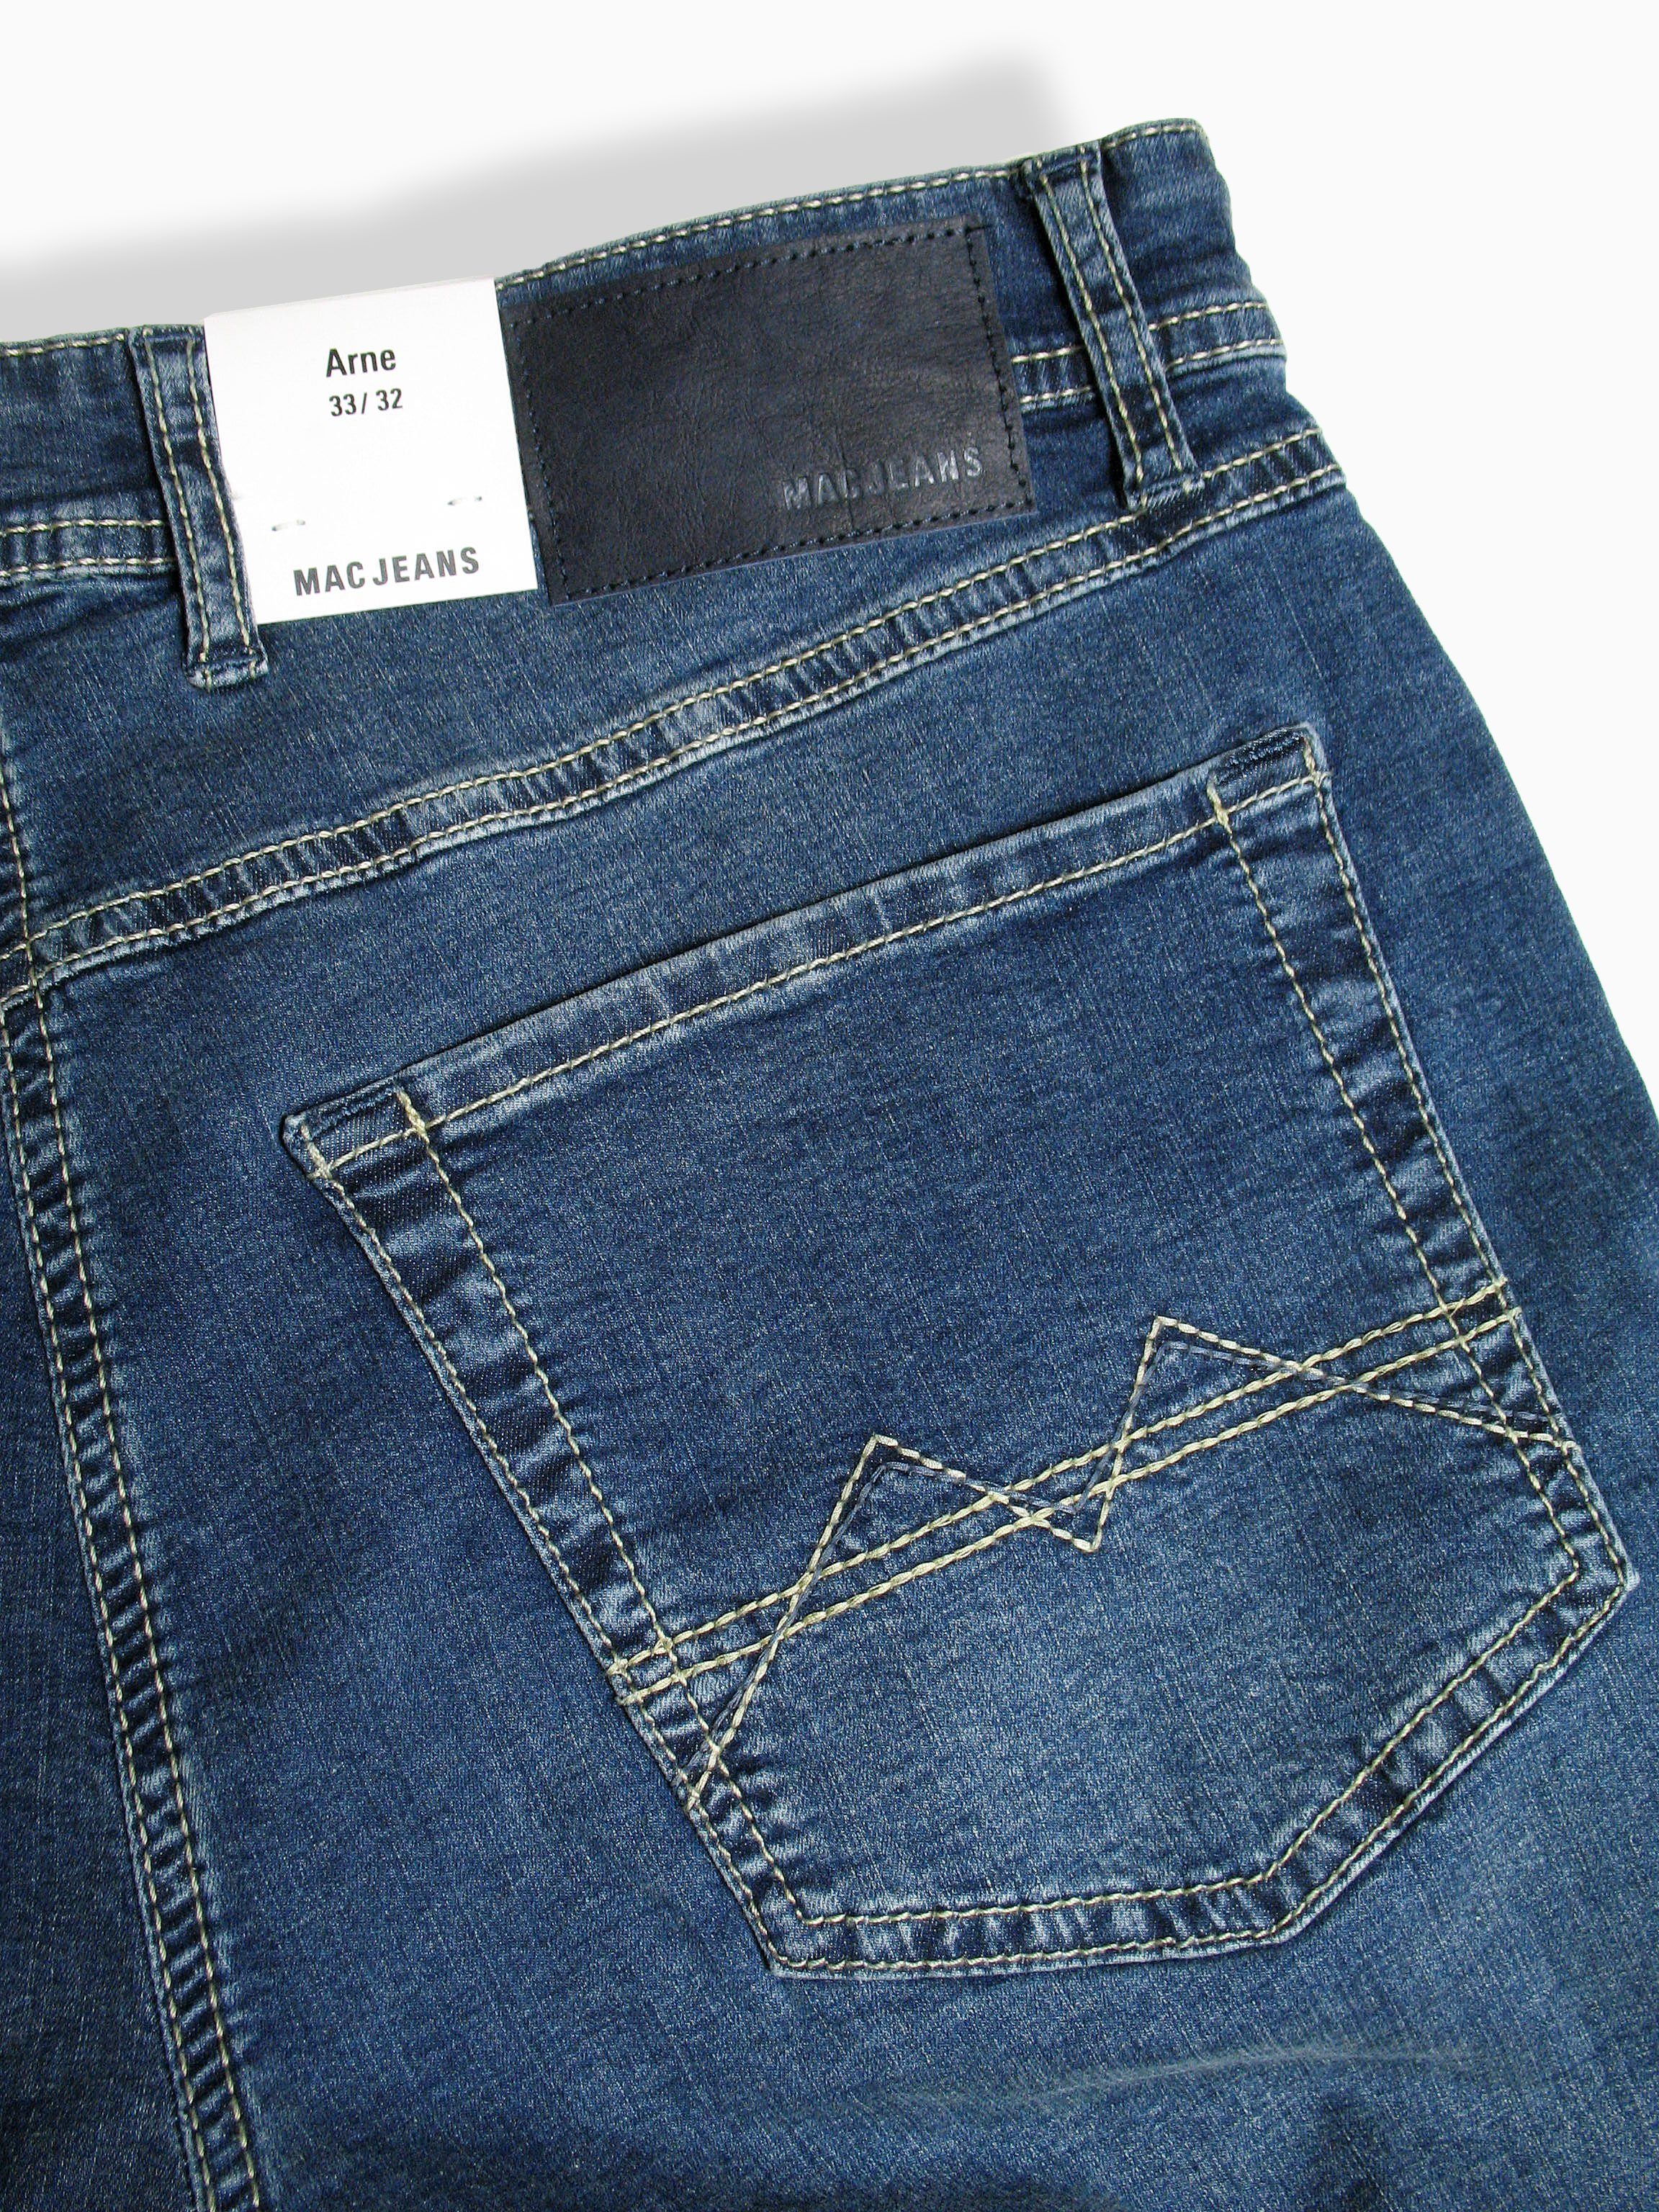 MAC 5-Pocket-Jeans Blue Summer Light Arne Stretch Authentic Used H547 Weight Denim